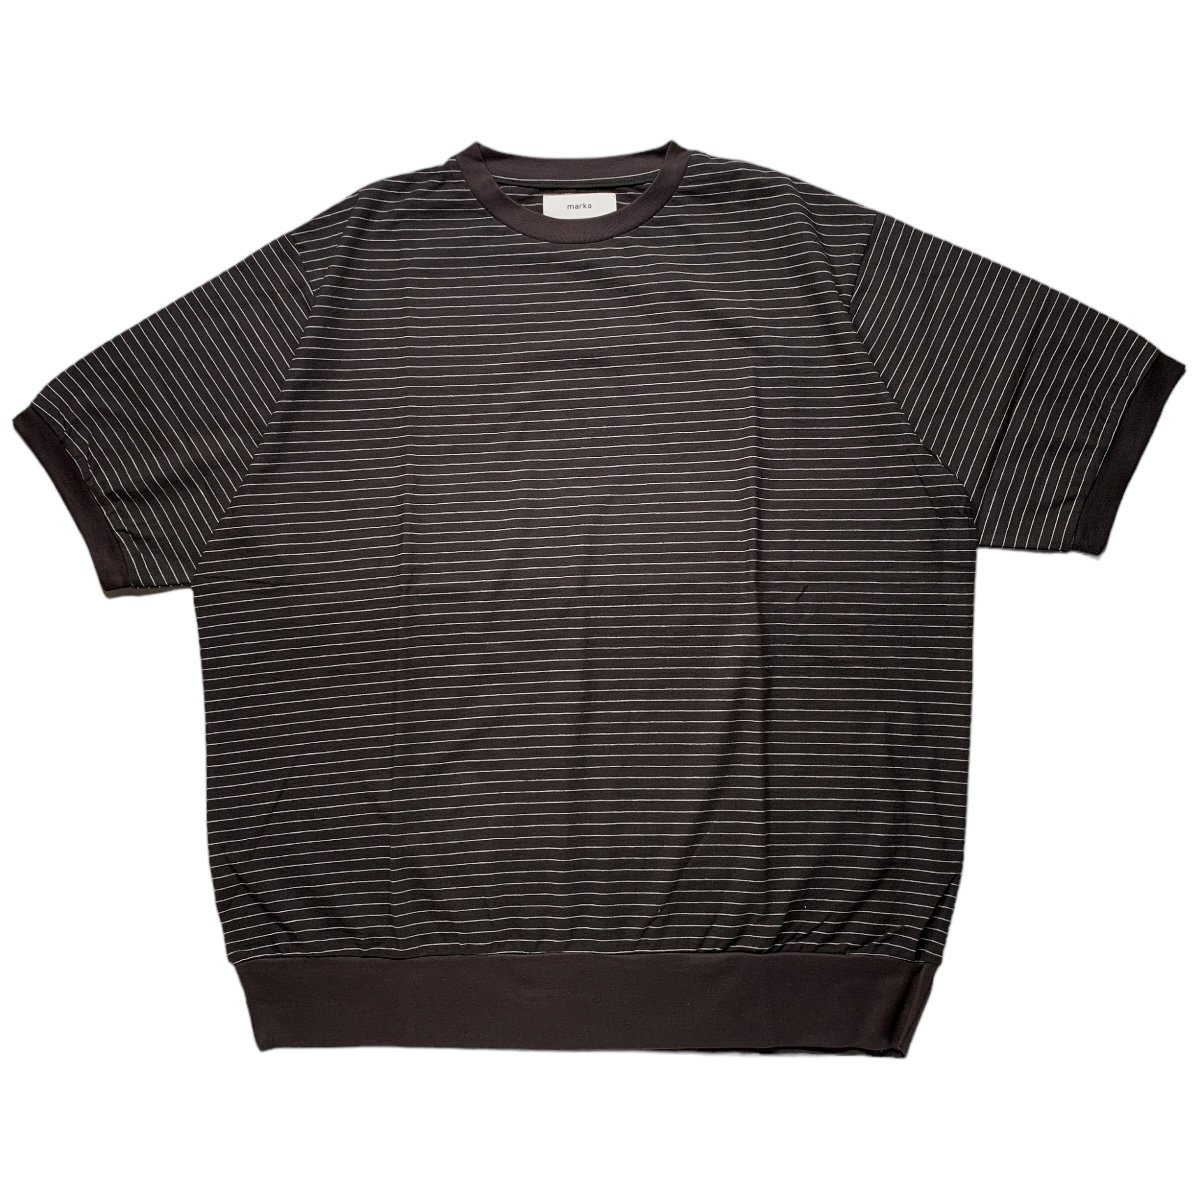 marka <BR>CREW NECK S/S - 30/1 ORGANIC COTTON HIGH TWISTED KNIT -(CHARCOAL)